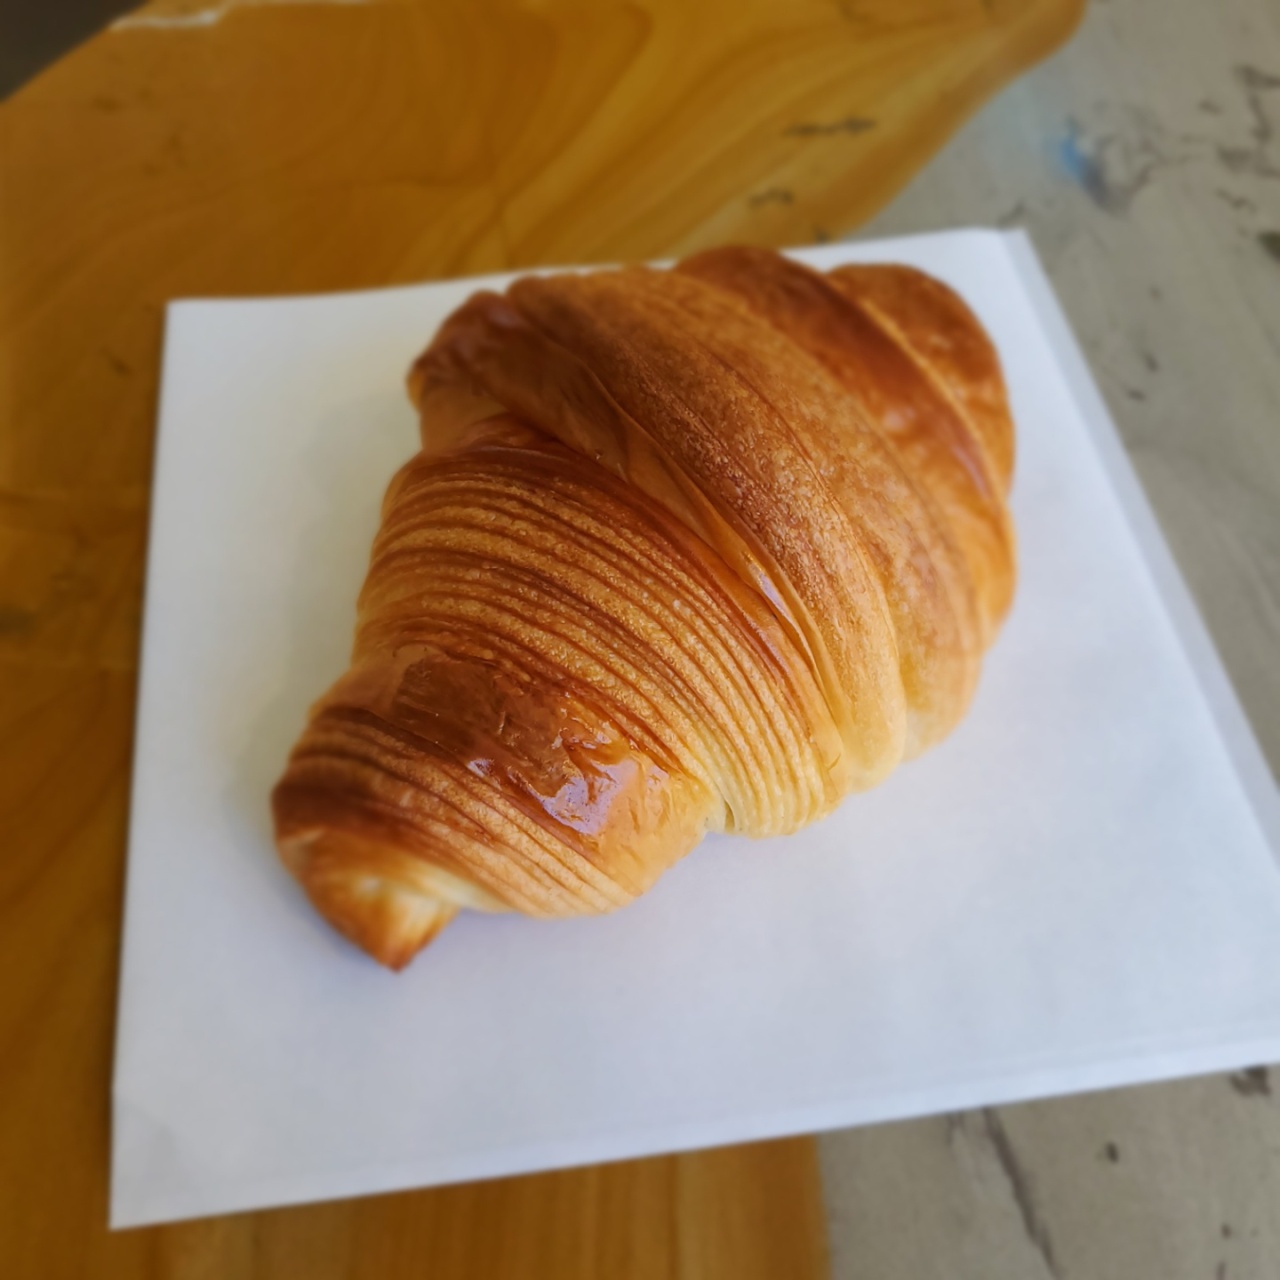 Artisan Croissant Bukchon’s croissants are crafted with carefully curated flours designed to complement the butter used to make them. (Artisan Croissant by Artisan Bakers)